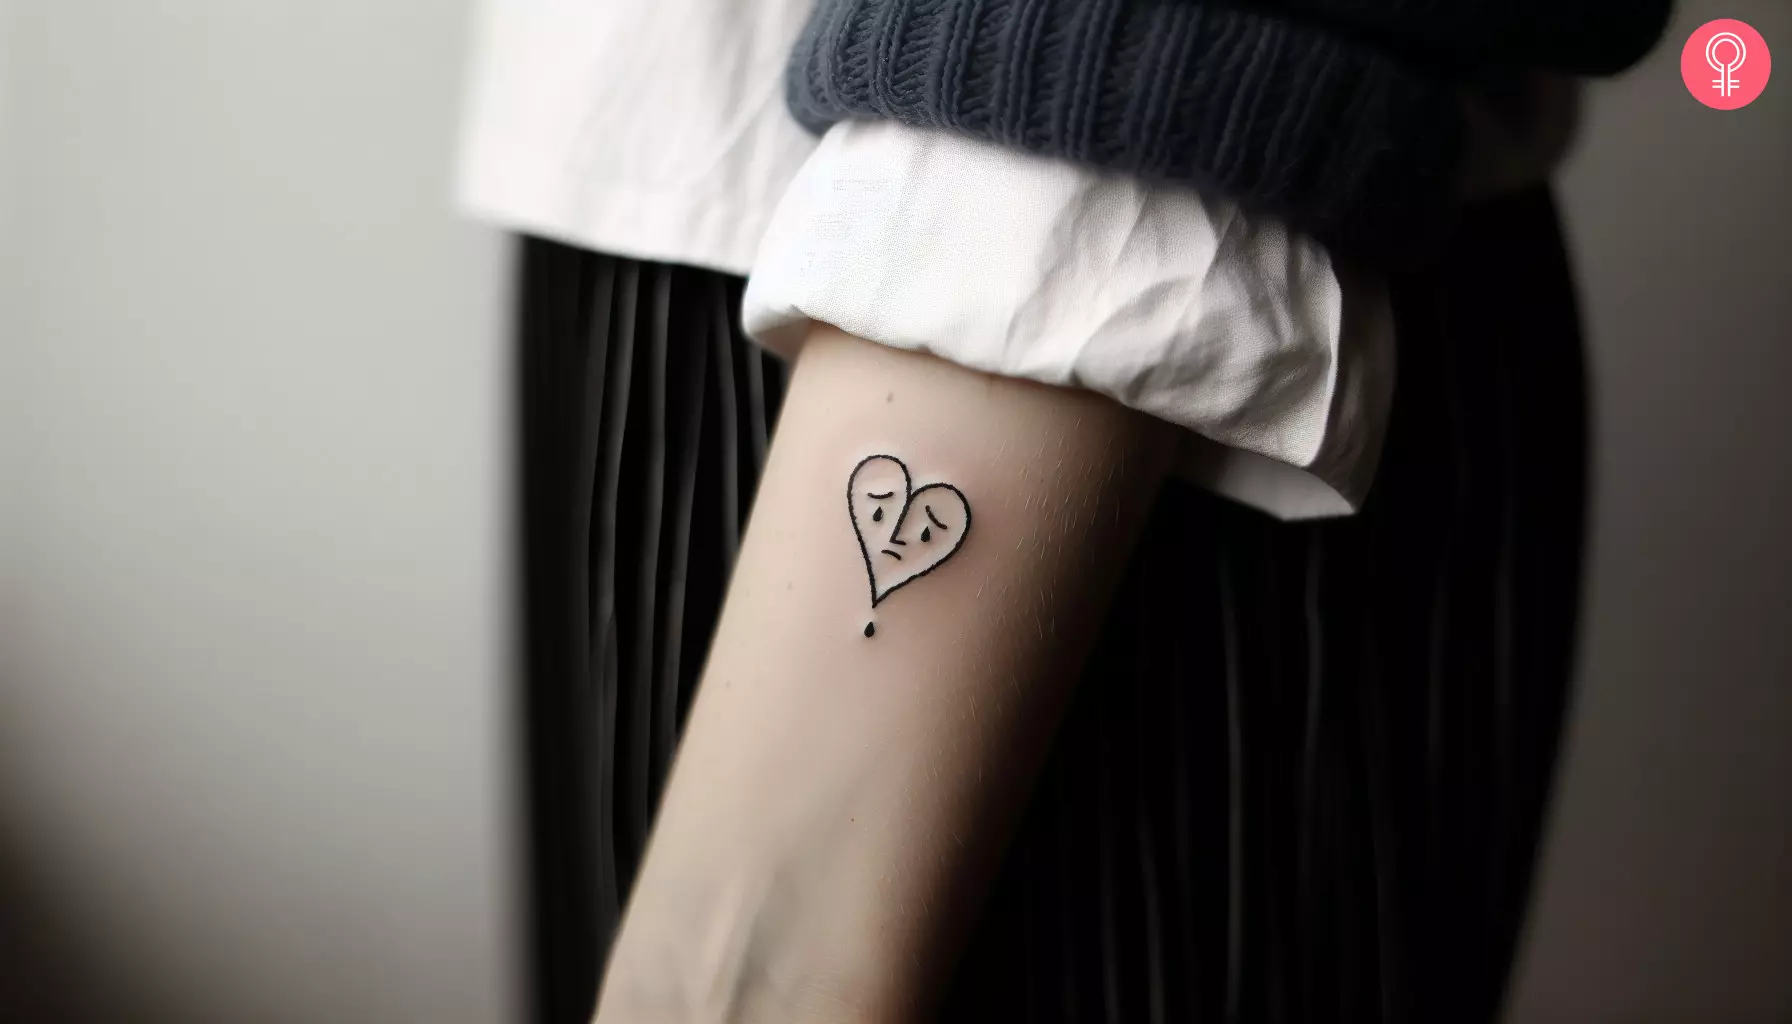 A heart with a sad face inked on the forearm